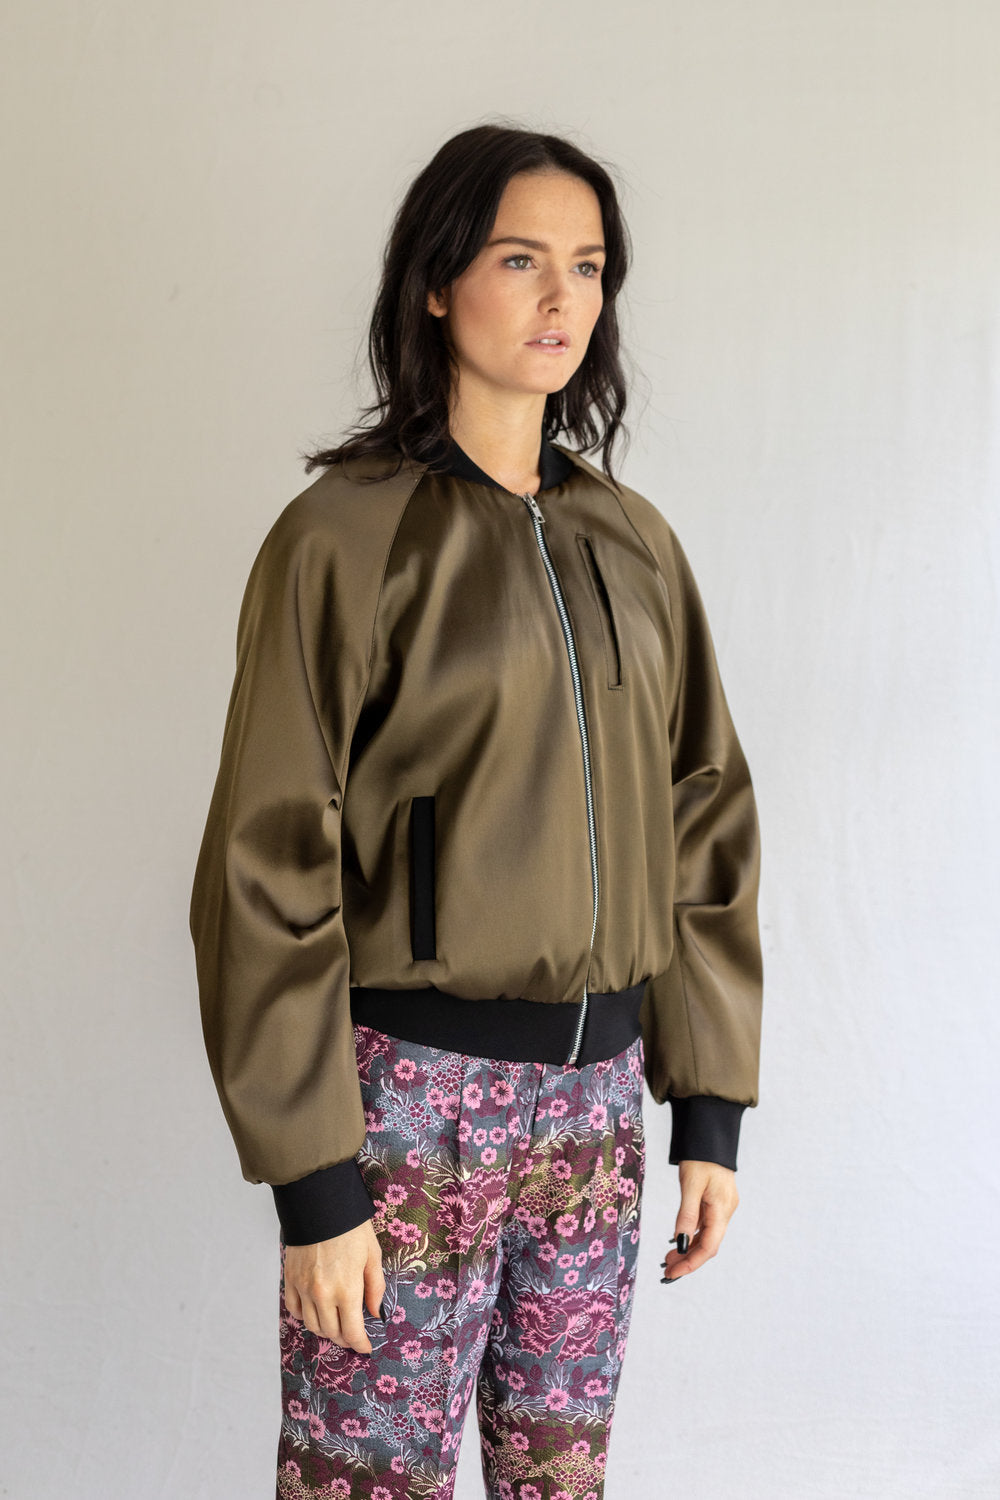 Trend Patterns TPC4 The Bomber Jacket